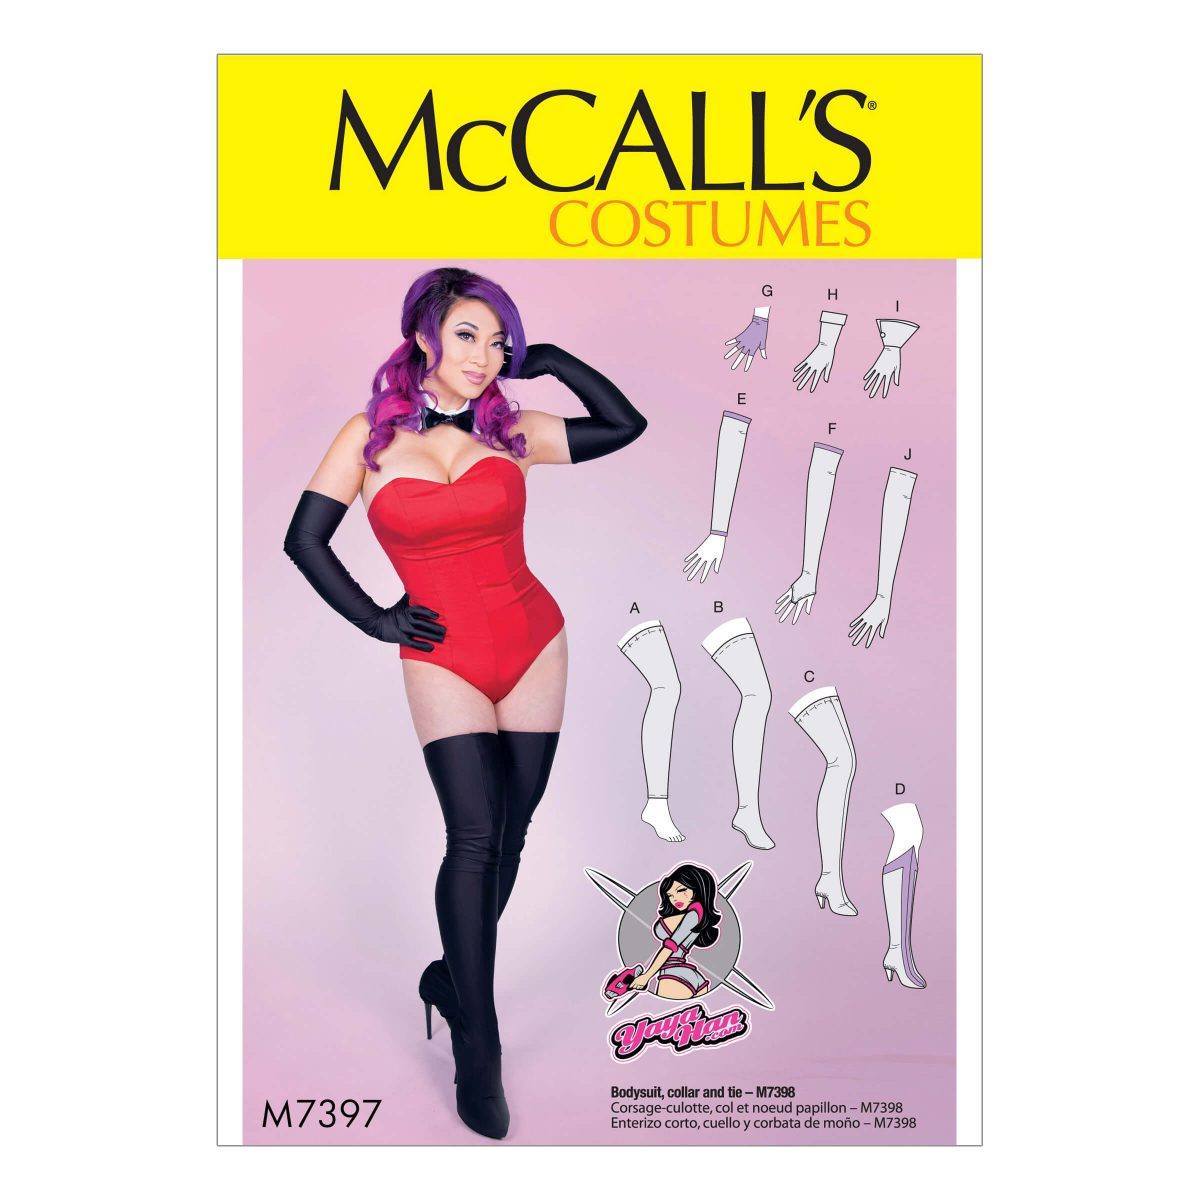 McCall's Sewing Pattern M7397 Misses' Gloves, Arm Warmers, Leg Warmers, Stockings and Boot Covers